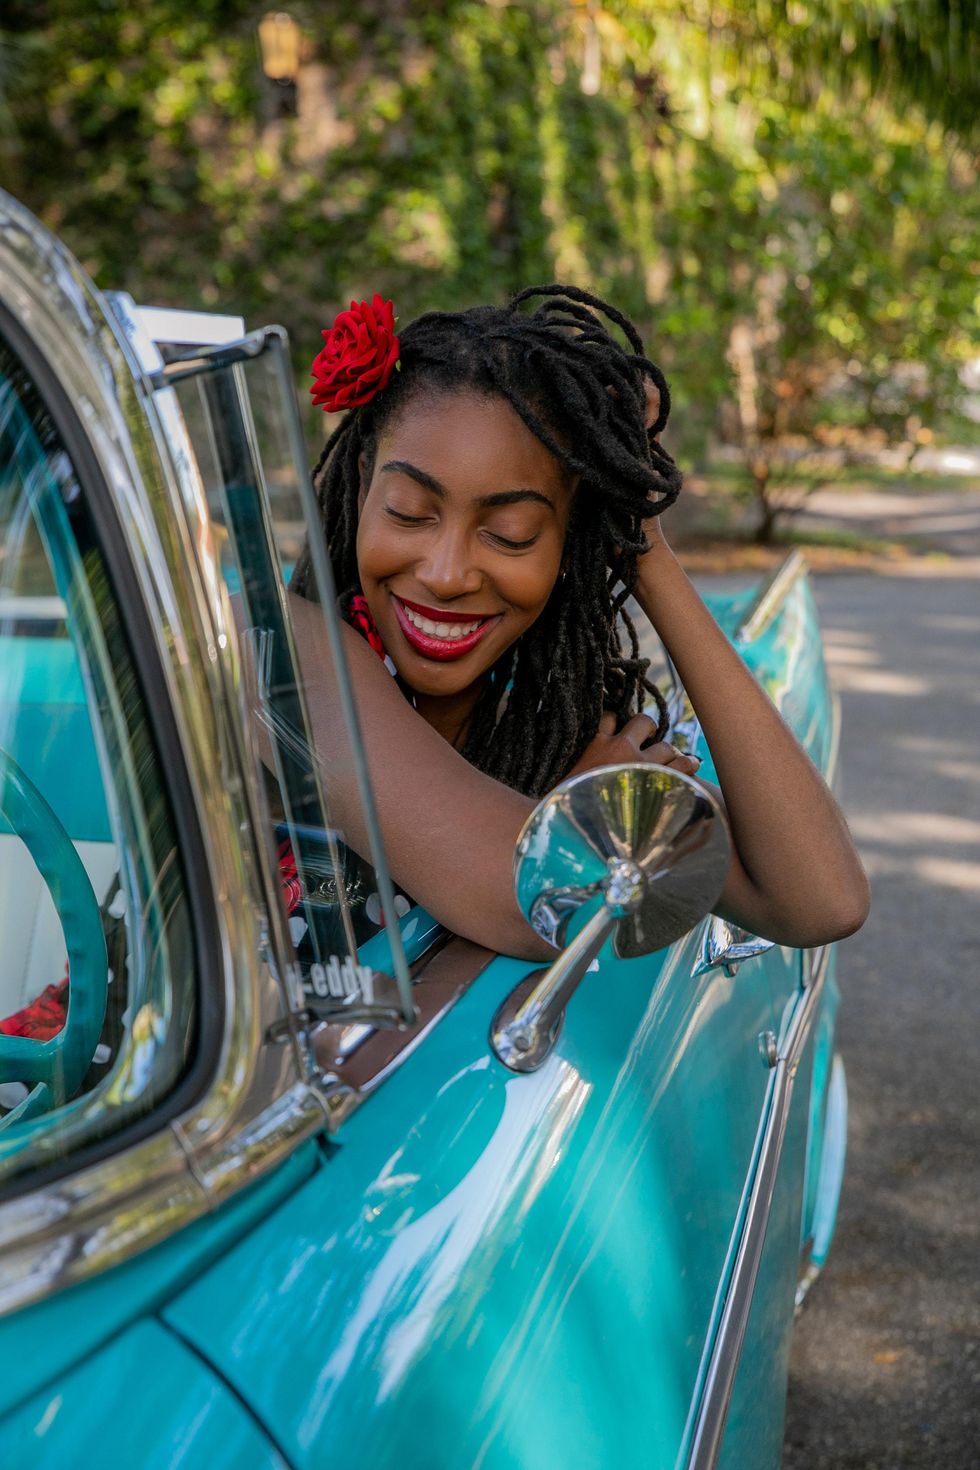 Photo by RODNAE Productions: https://www.pexels.com/photo/a-woman-touching-her-hair-while-sitting-in-a-blue-car-8249892/